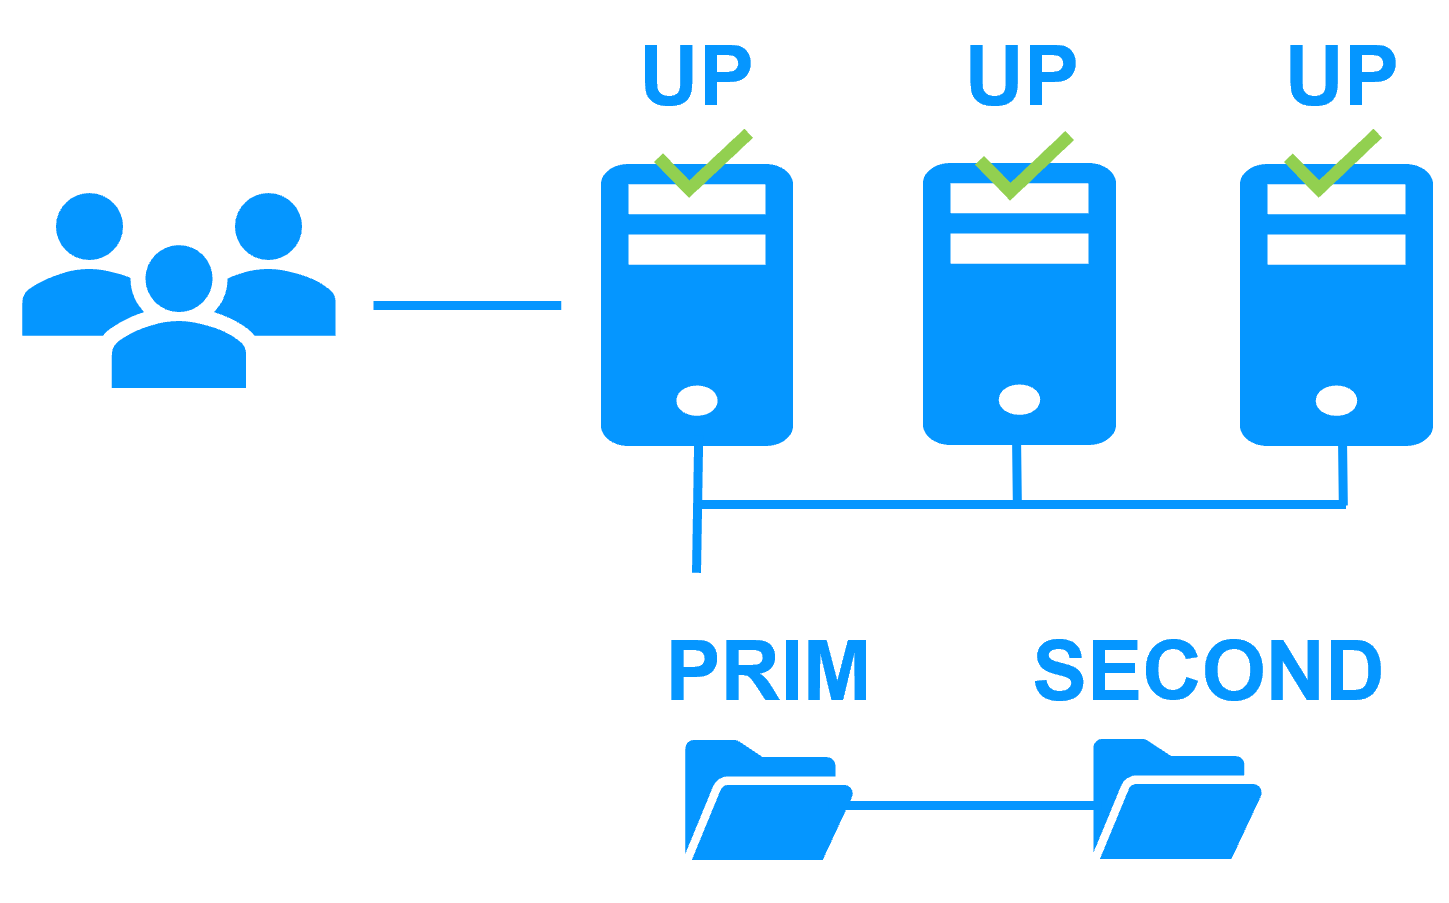 Uniform high availability solution with farm and mirror clusters